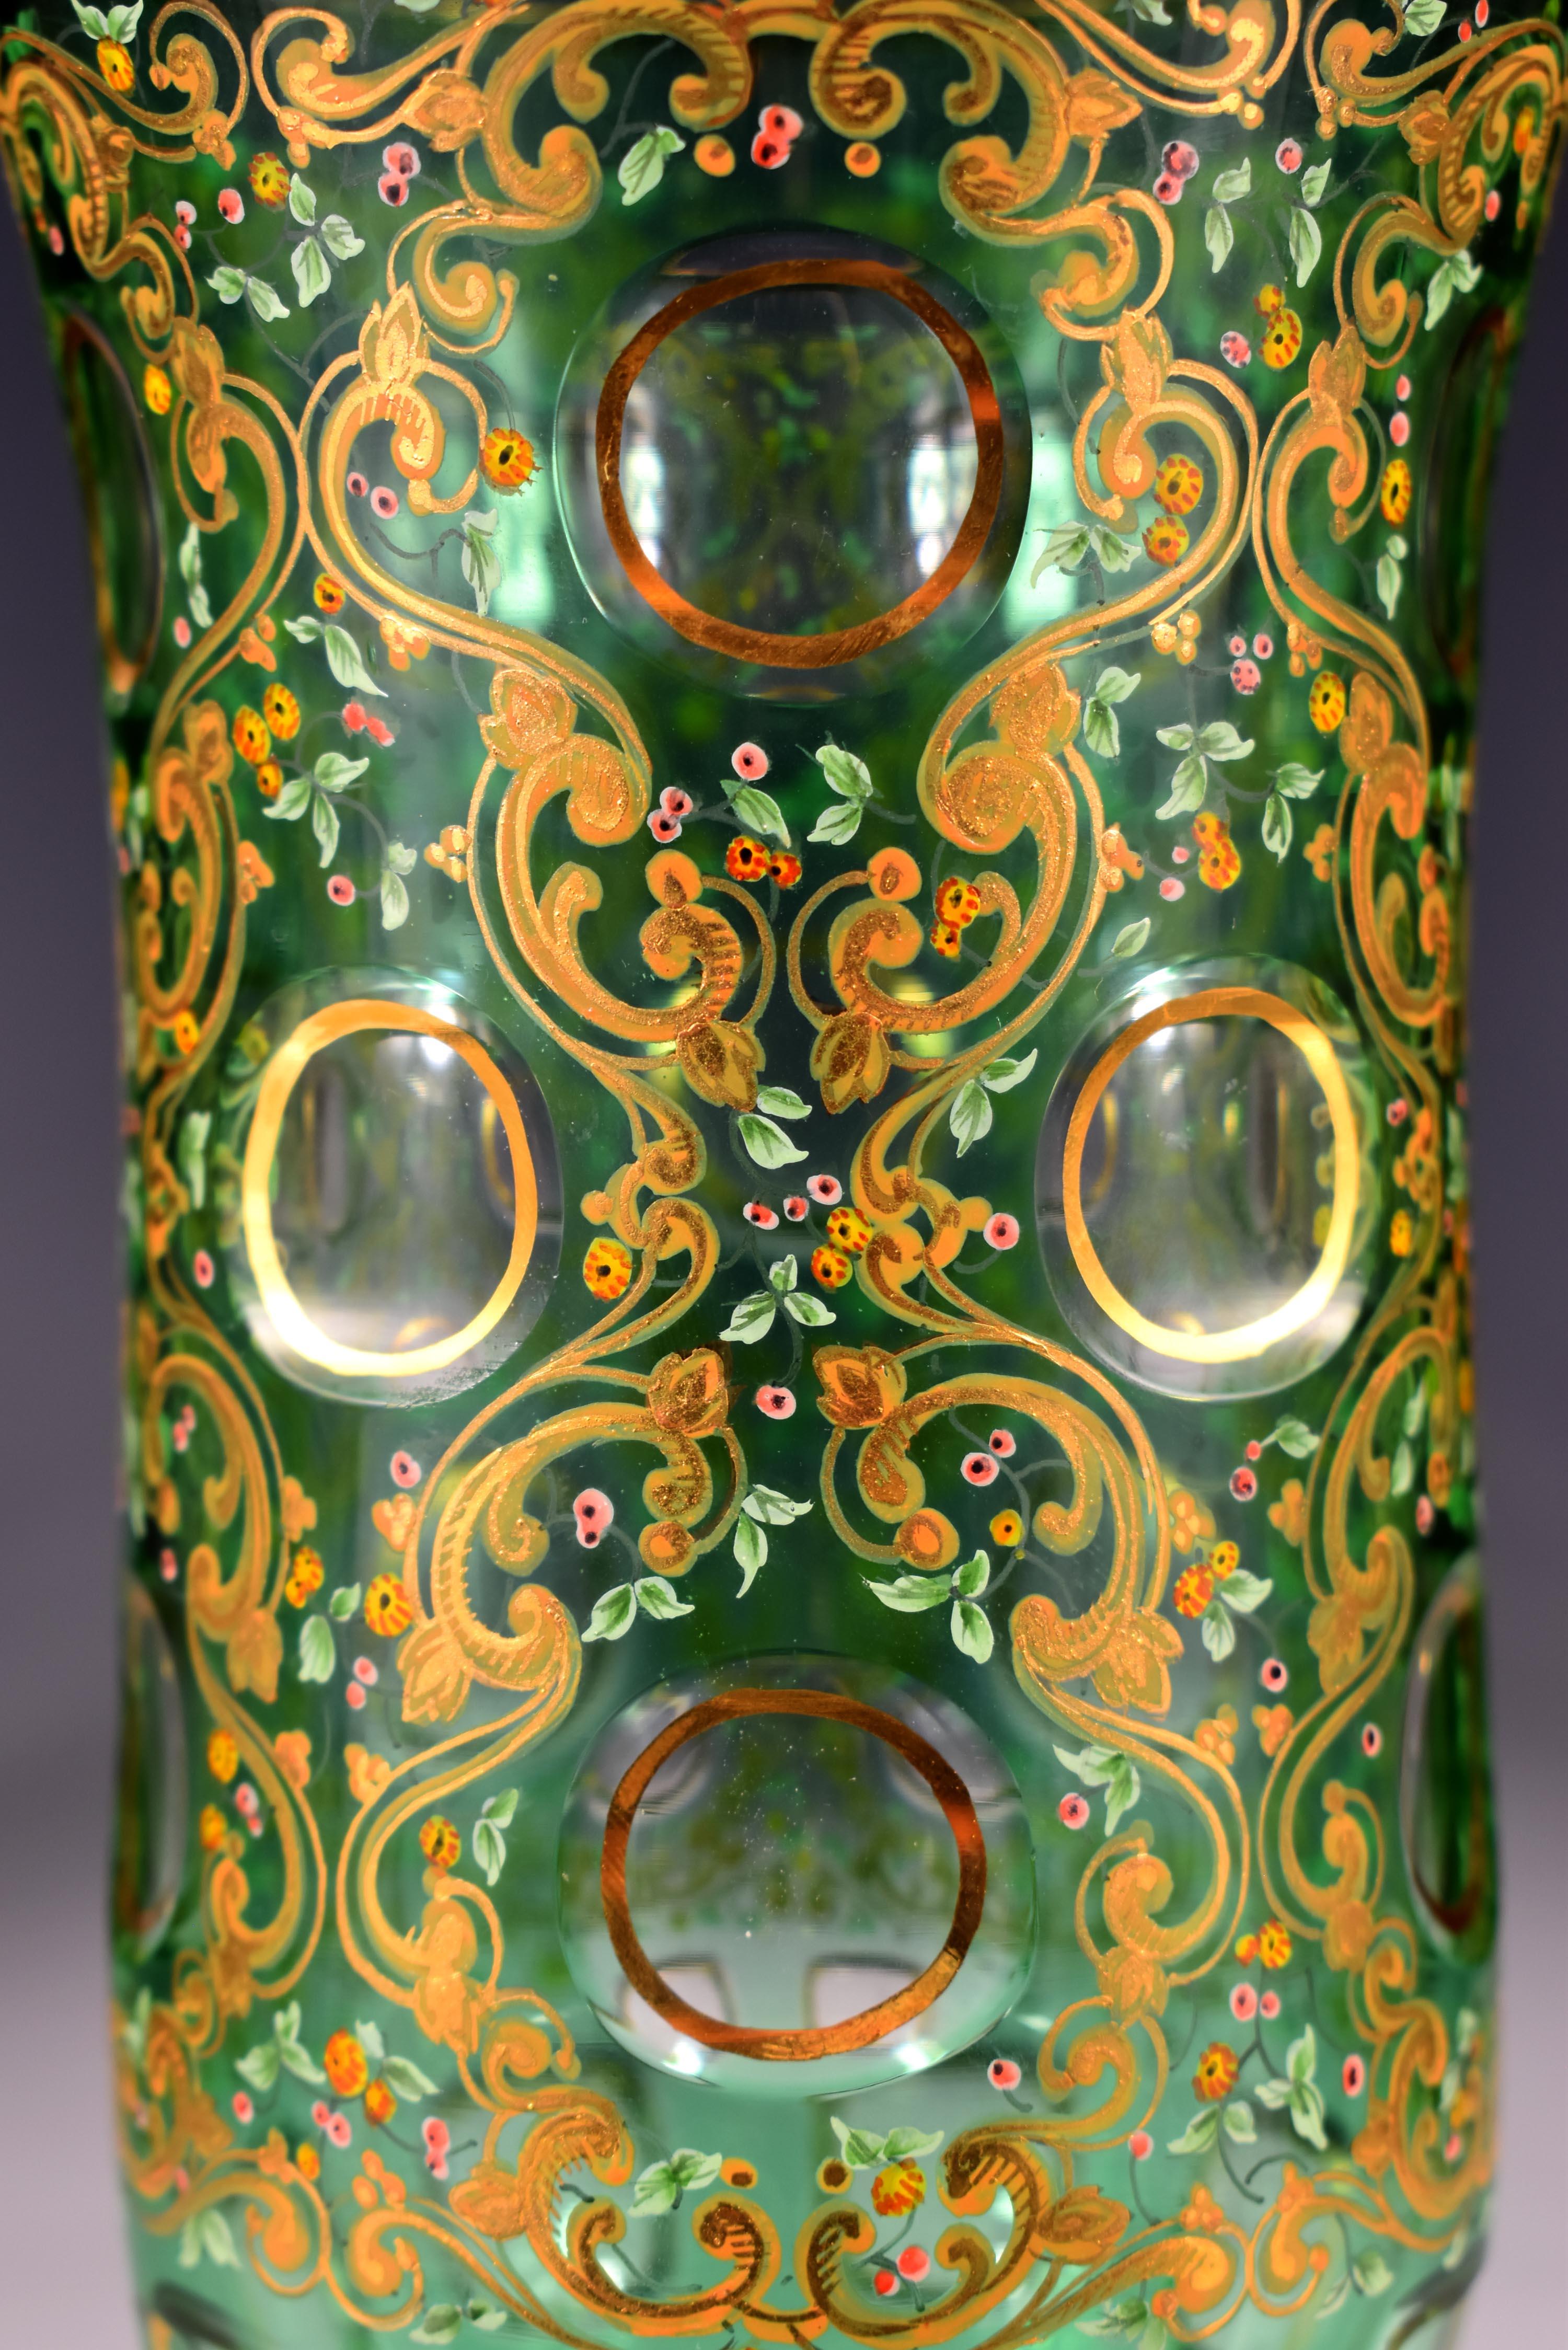 Painted Vase - Overlay Green Glass - 20th Century Bohemian Glass In Good Condition For Sale In Nový Bor, CZ